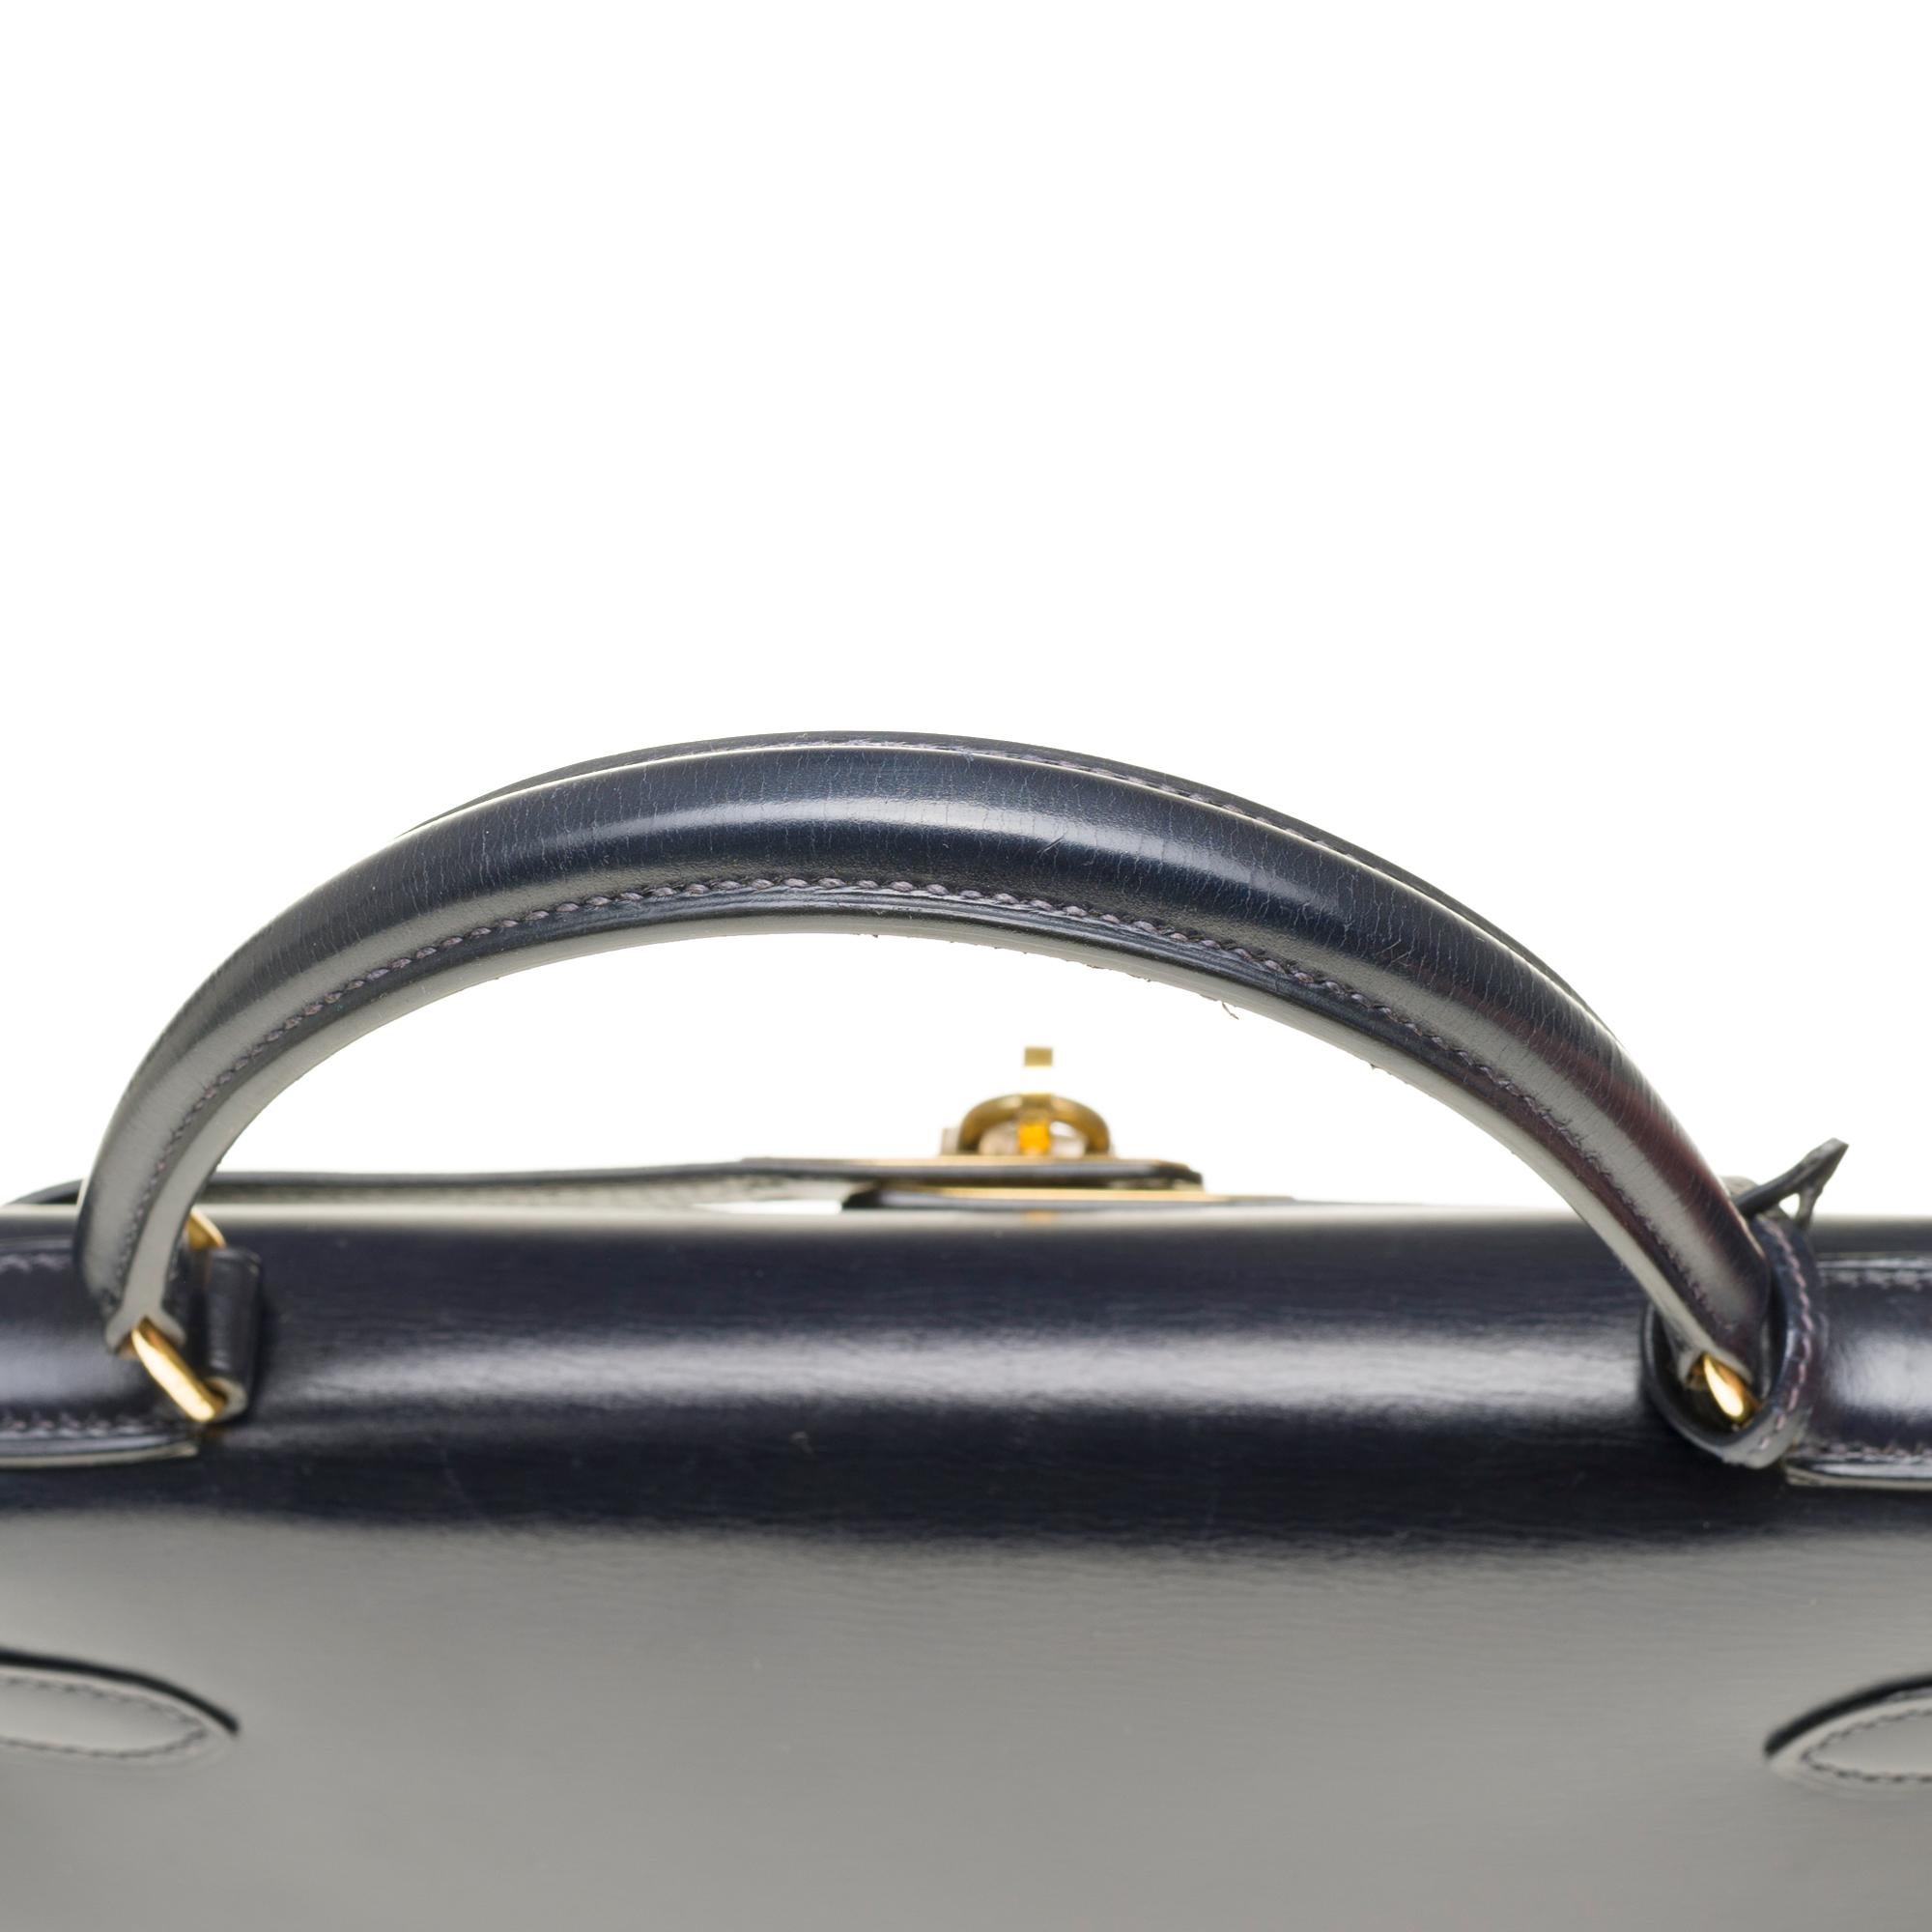 Amazing & Rare Hermès Mini Kelly 30cm sellier strap in navy blue calf and GHW 2